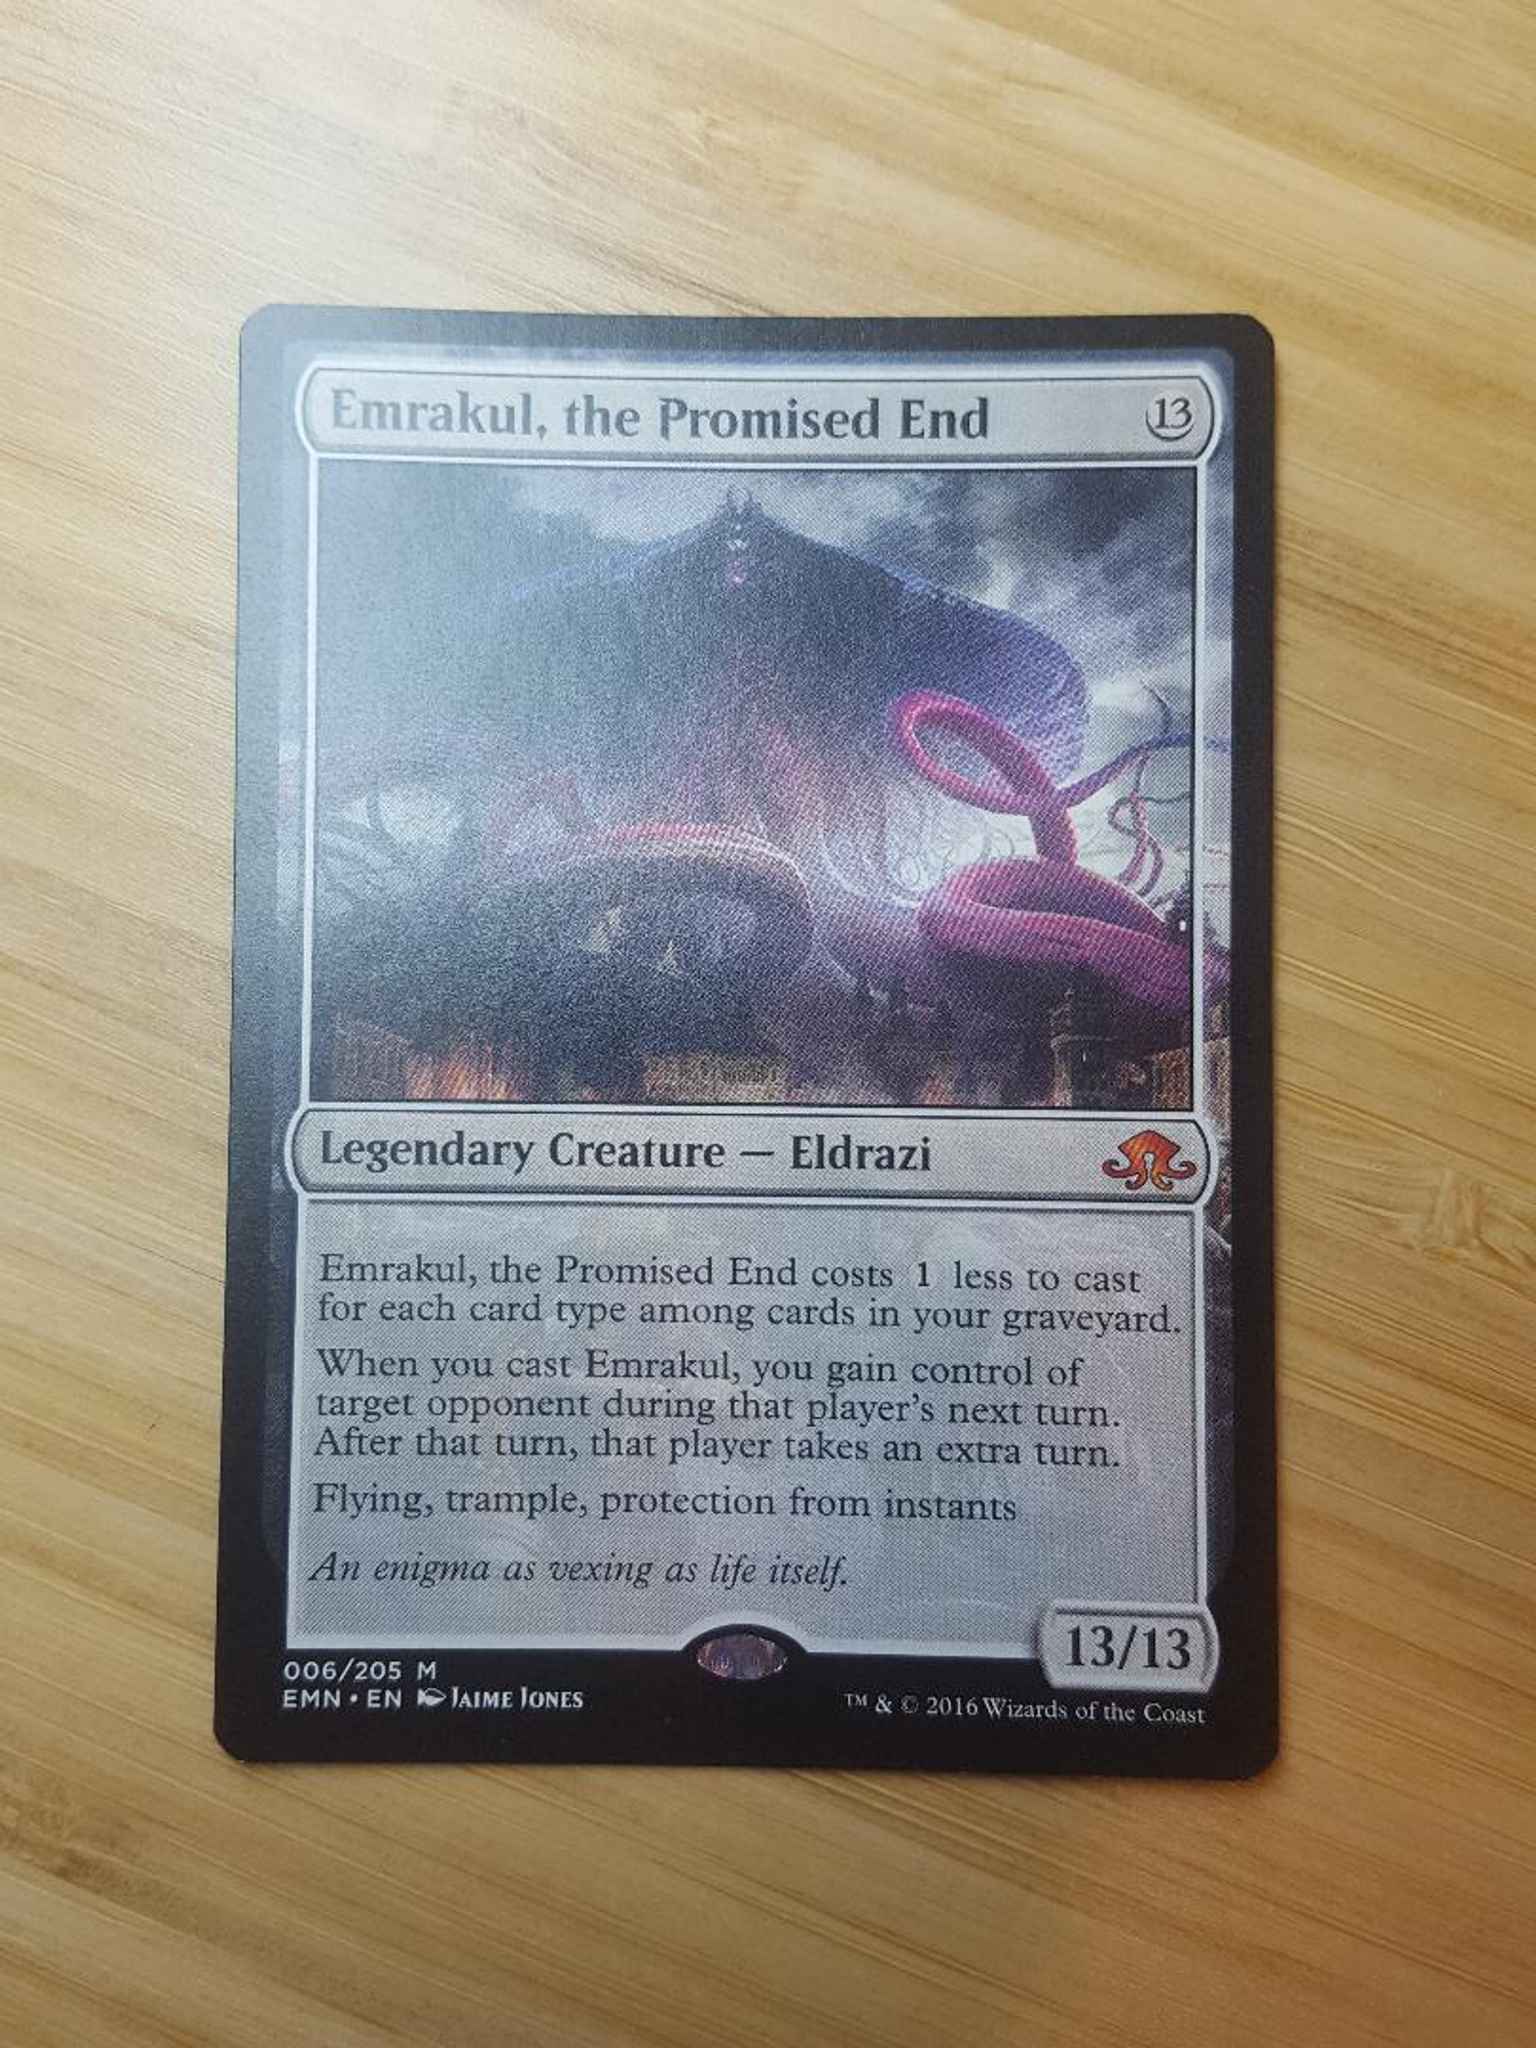 Details about   MTG Magic the Gathering Foil Emrakul the Promised End Eldritch Moon x1 NM #1 